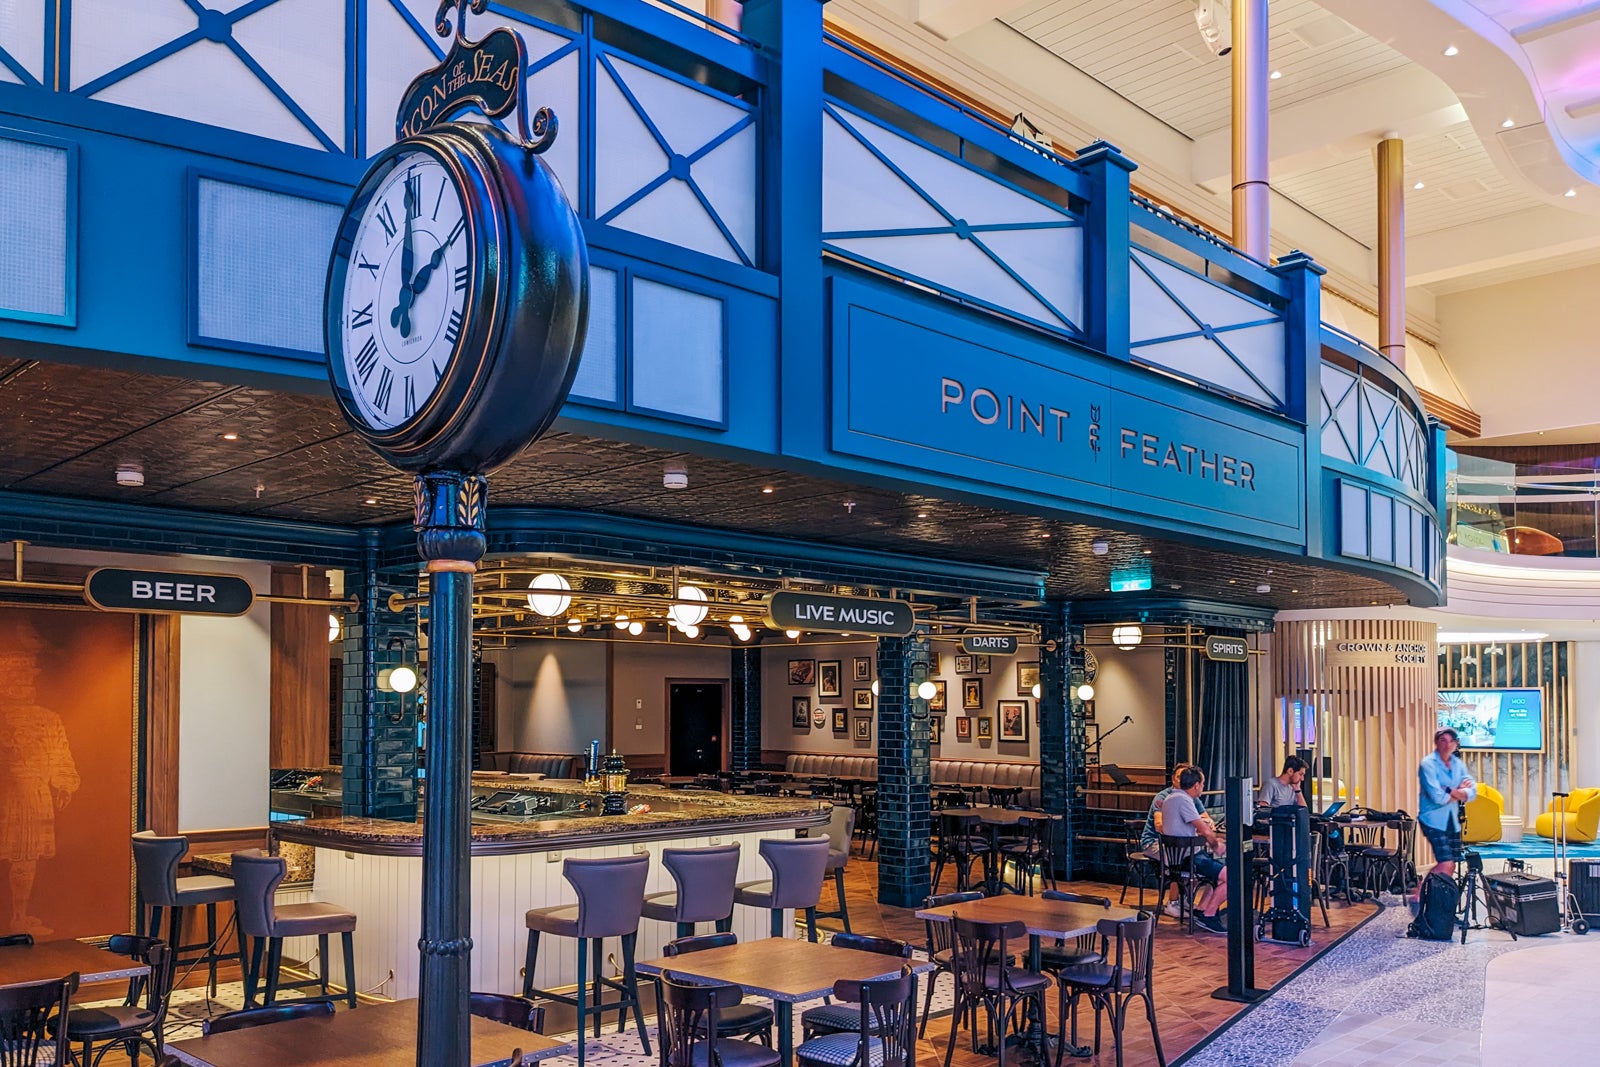 Point and Feather pub on Icon of the Seas